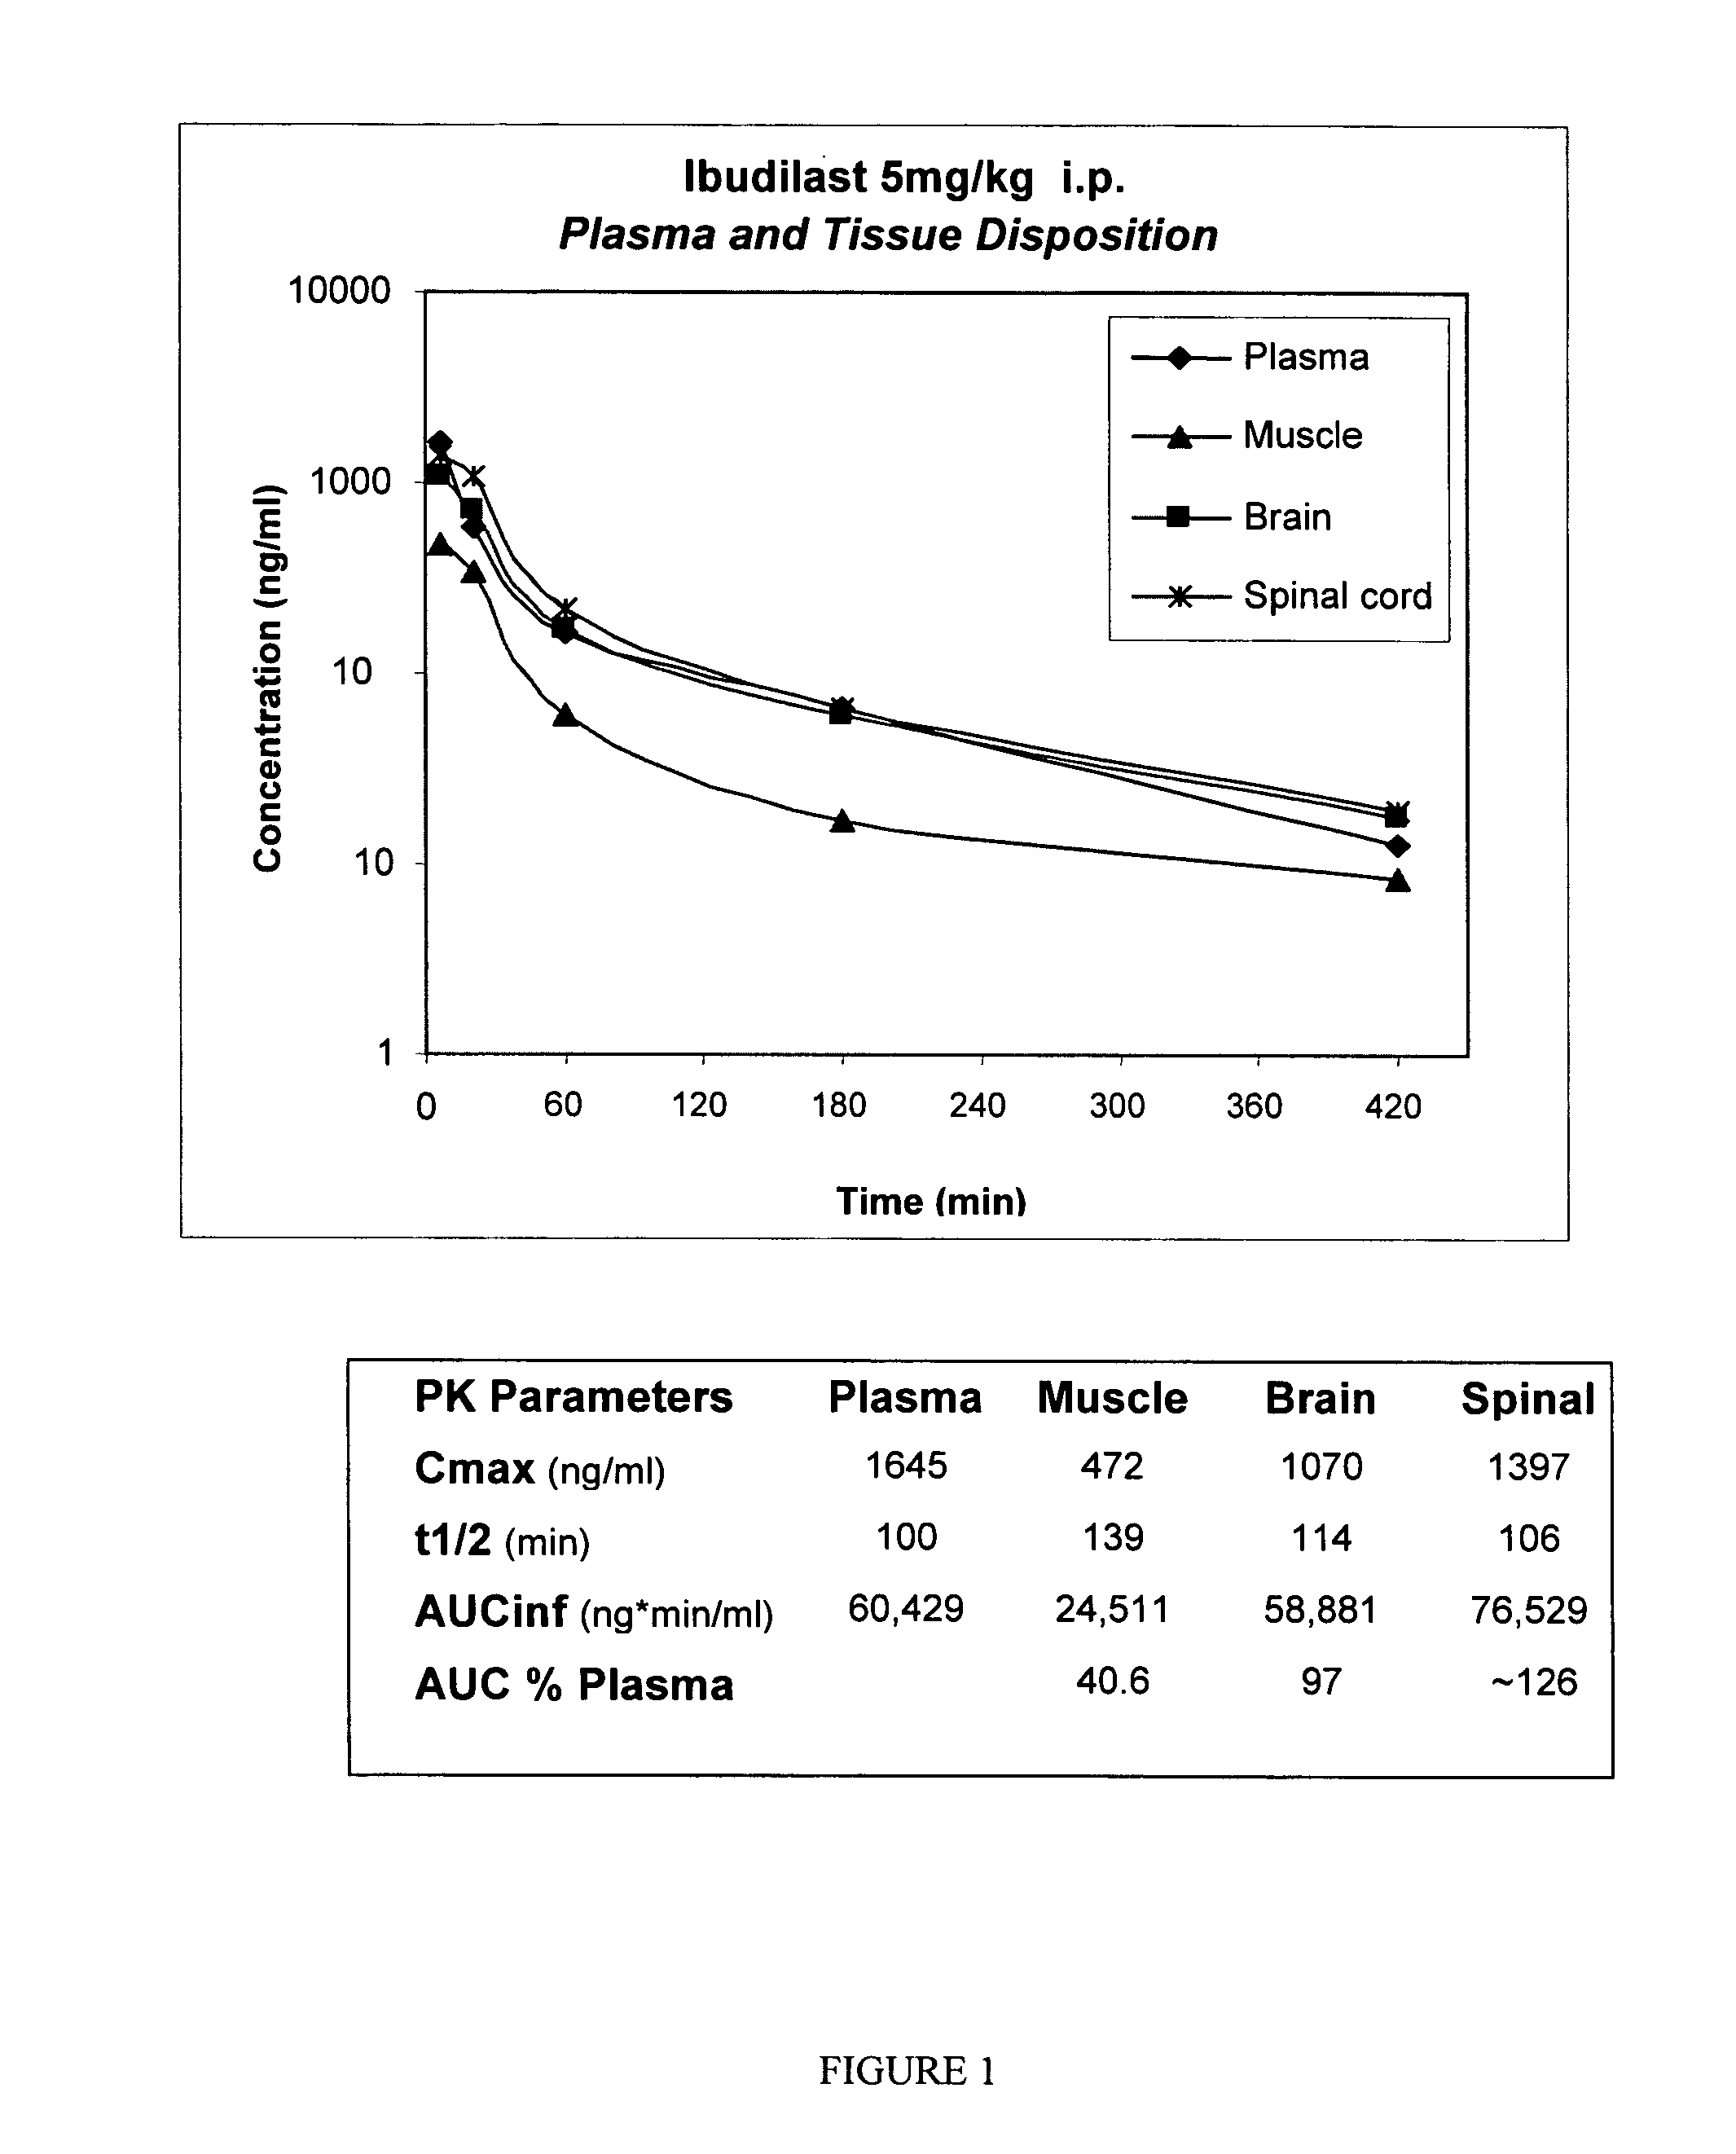 Method for treating drug and behavioral addictions